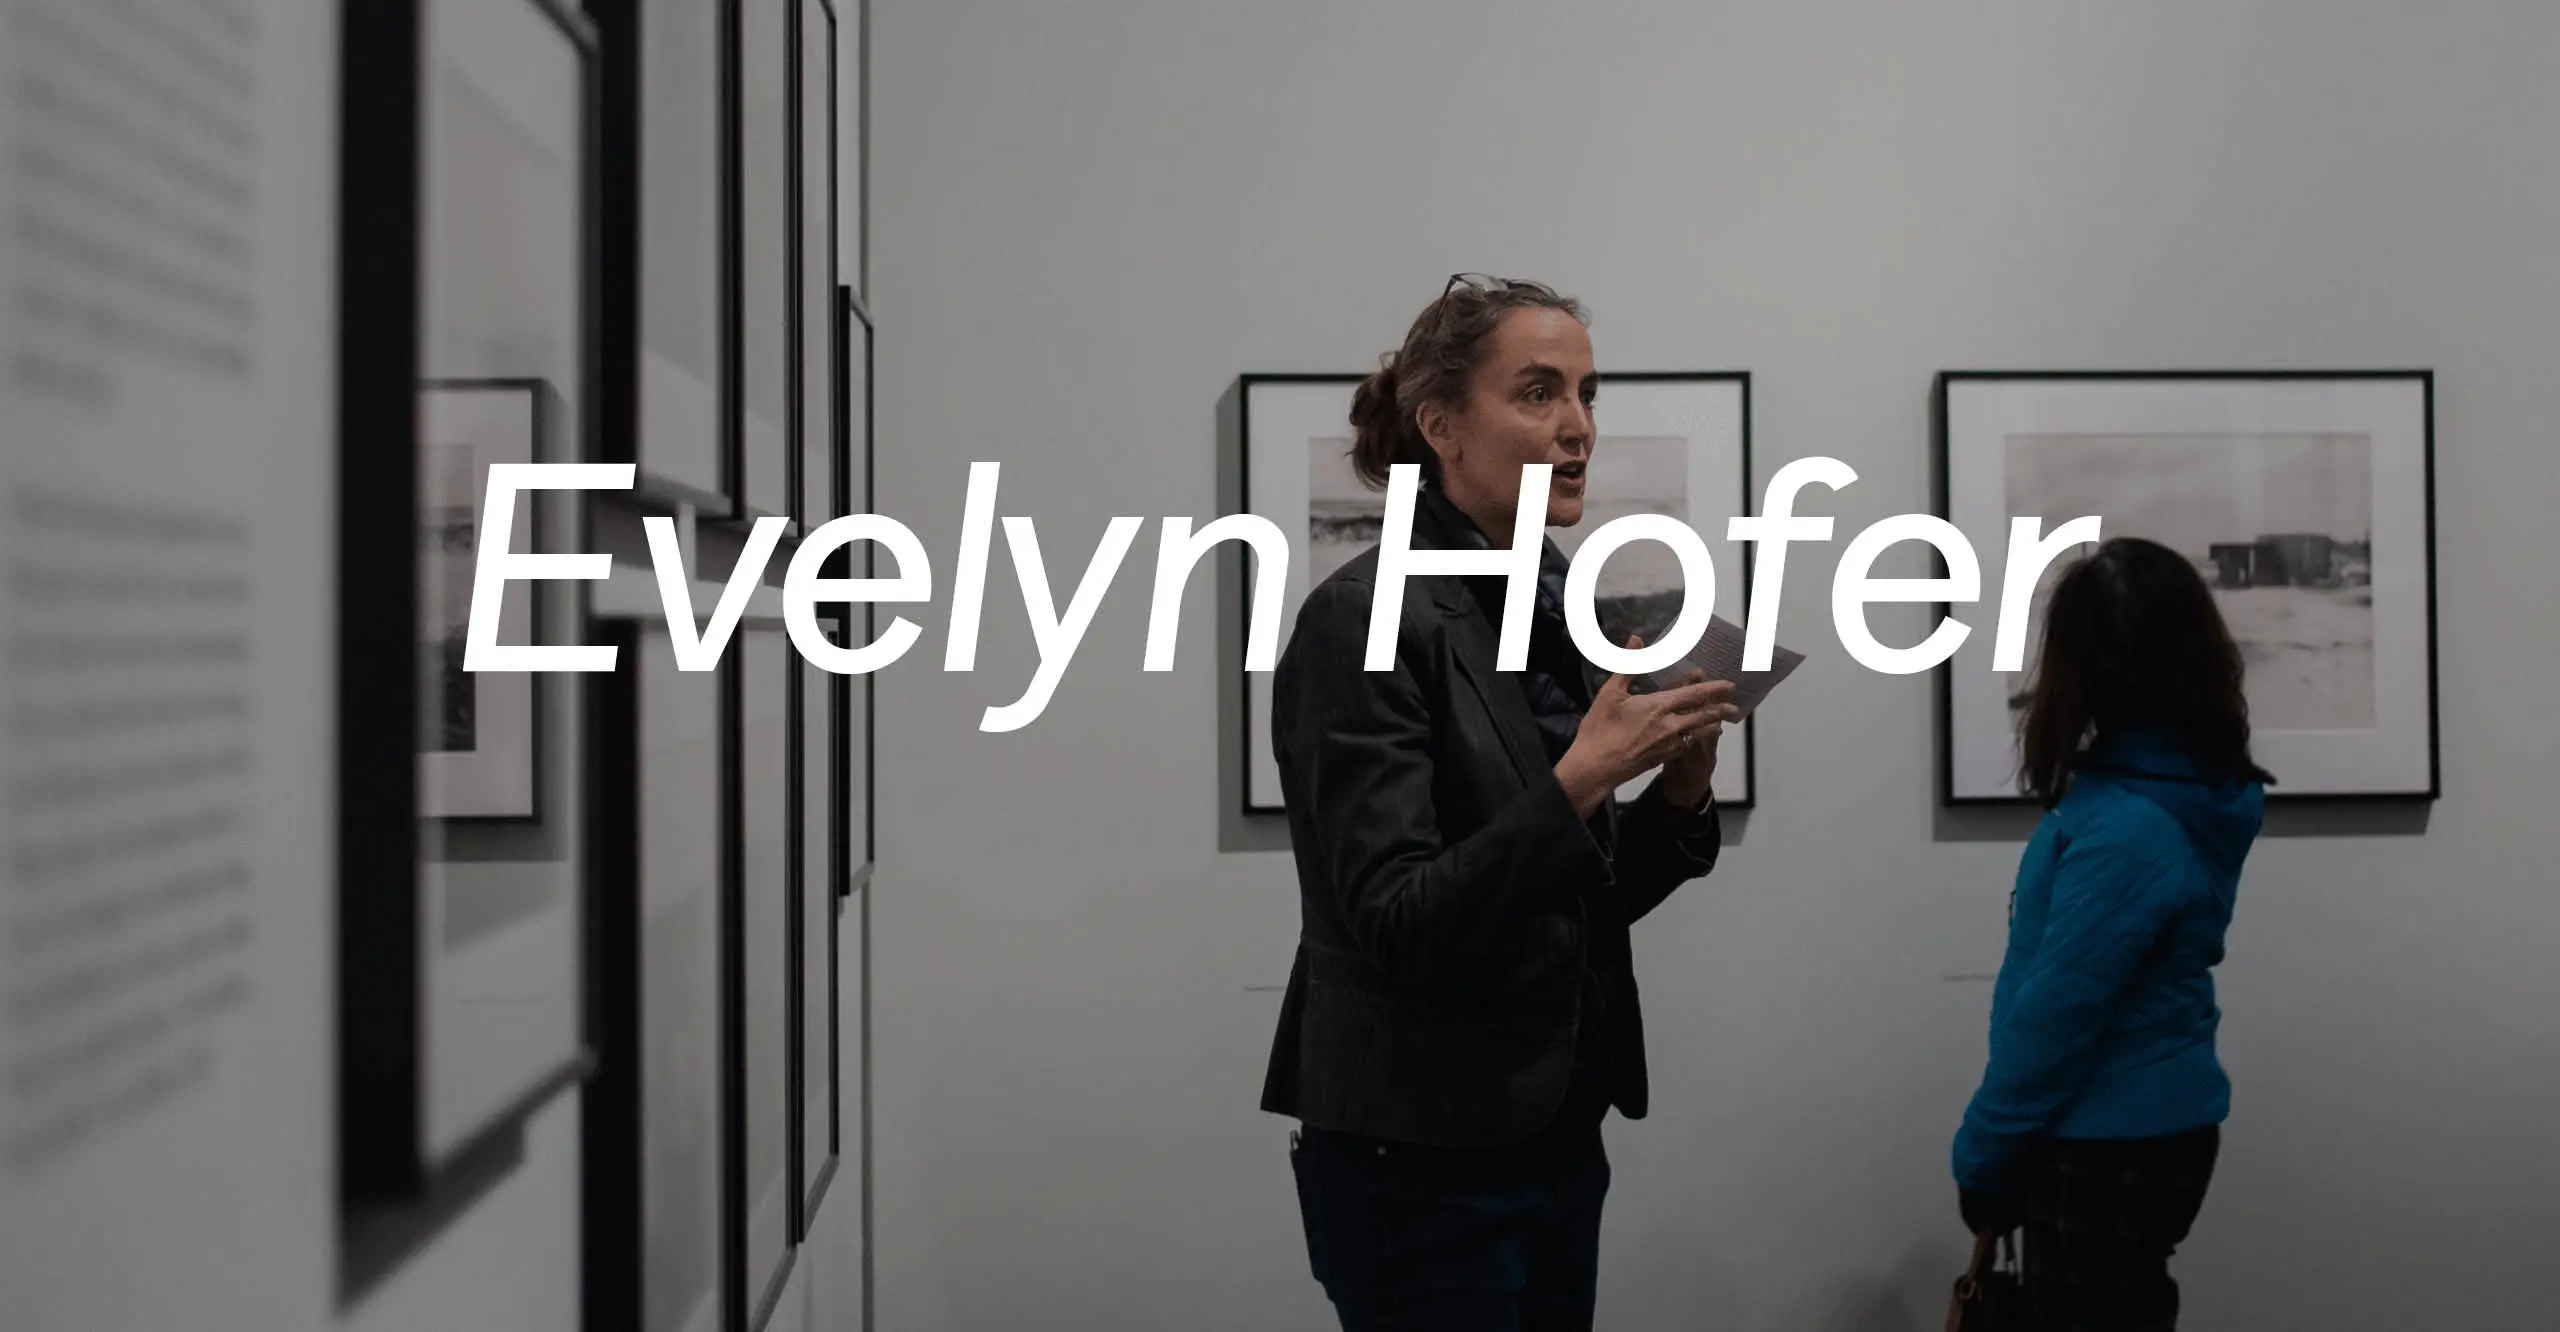 Gif of two images. The first of a blue digital world with the words 'Between Worlds' over it and the other of a person giving an exhibition tour in a Gallery space with the words 'Evelyn Hofer' over it